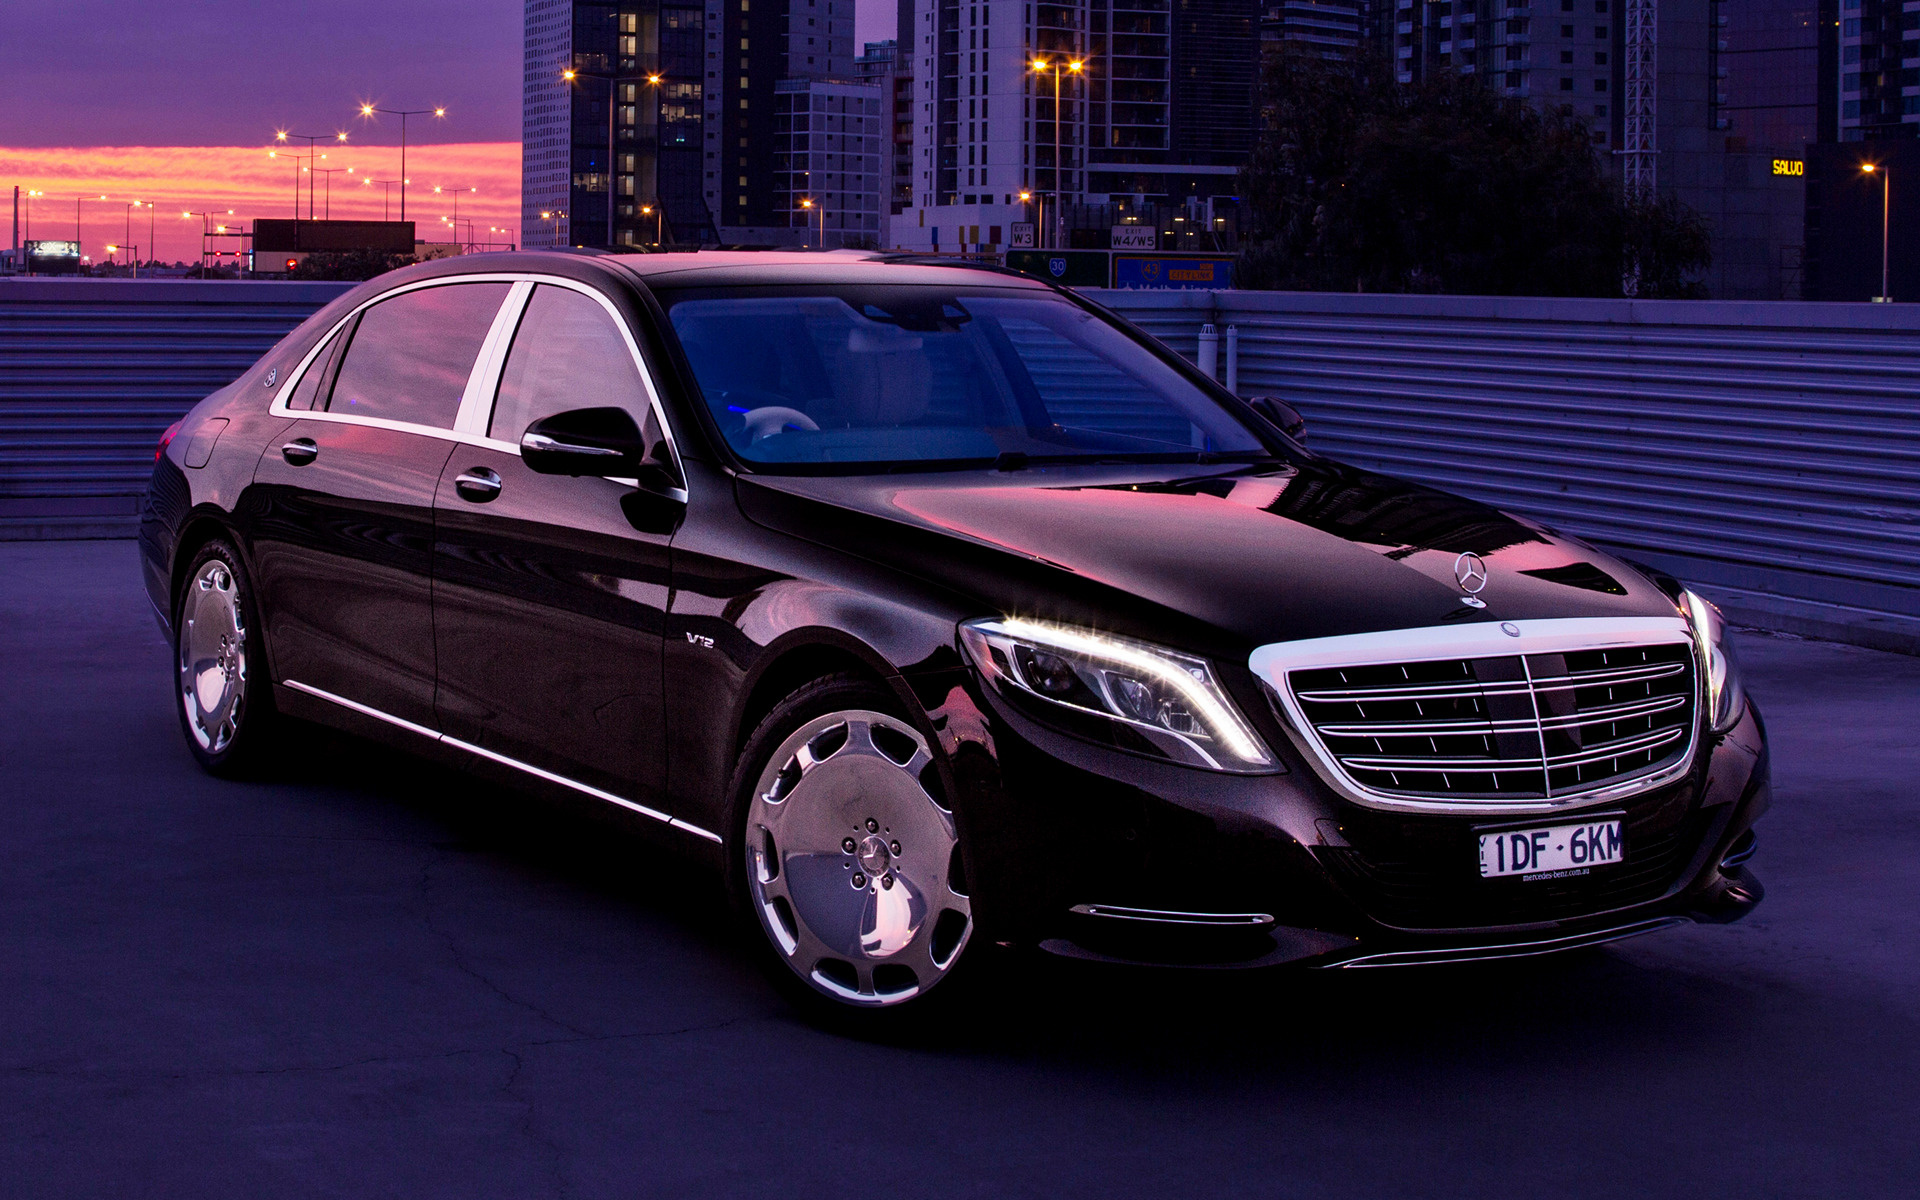 Мерседес s600. Майбах-Мерседес s600. Mercedes Benz Maybach s600. Mercedes s class Maybach s600 v12. Мерседес Майбах 600.